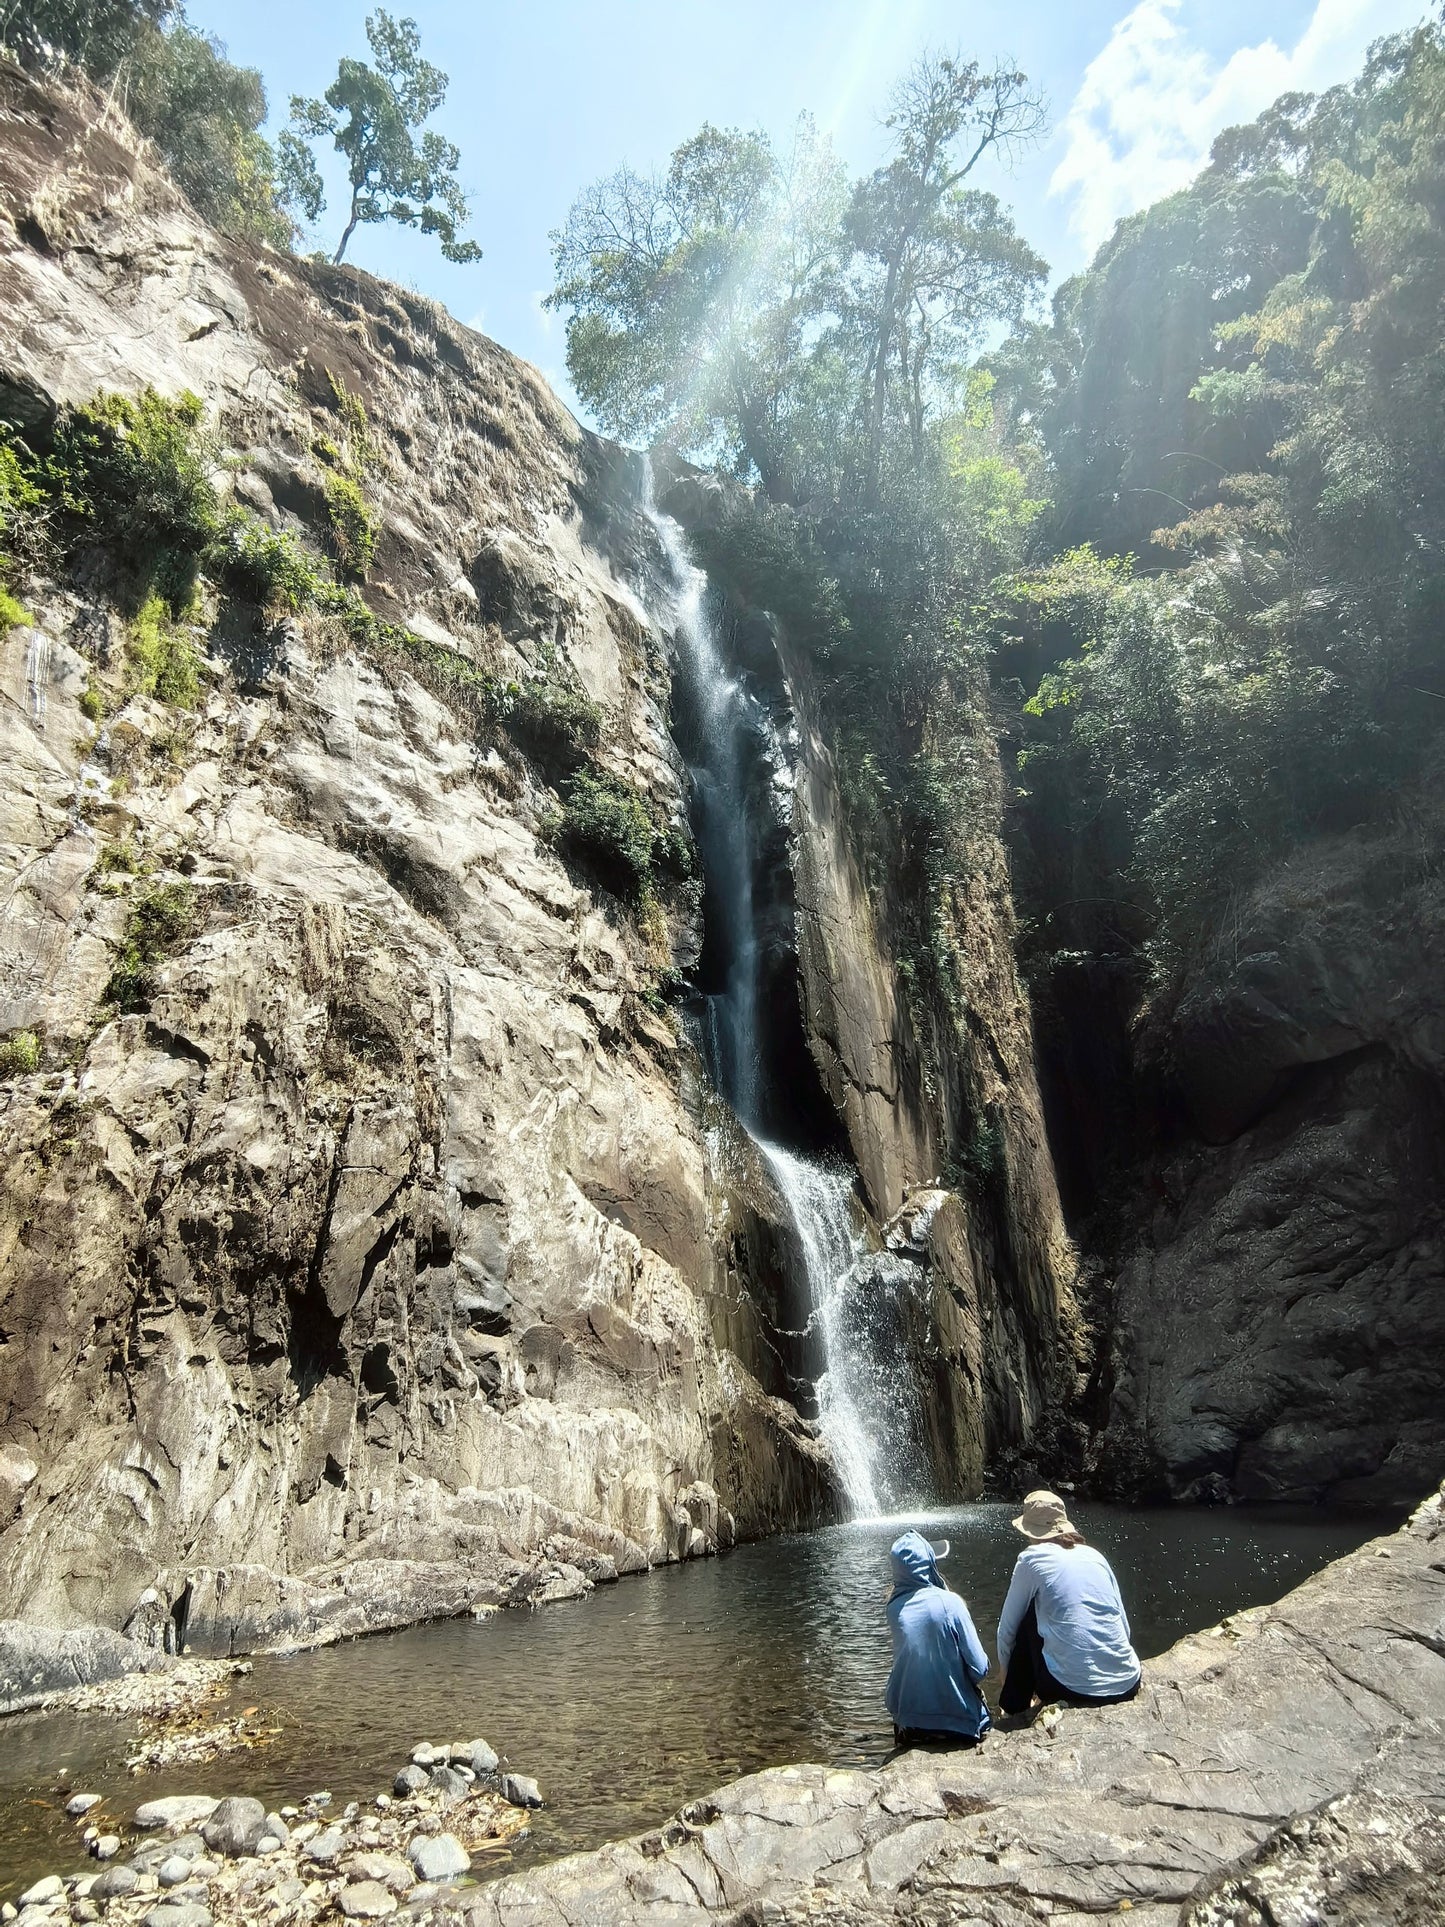 88A: Drizzling Rain Waterfall, Experience The Thrill Of Conquering The Wild